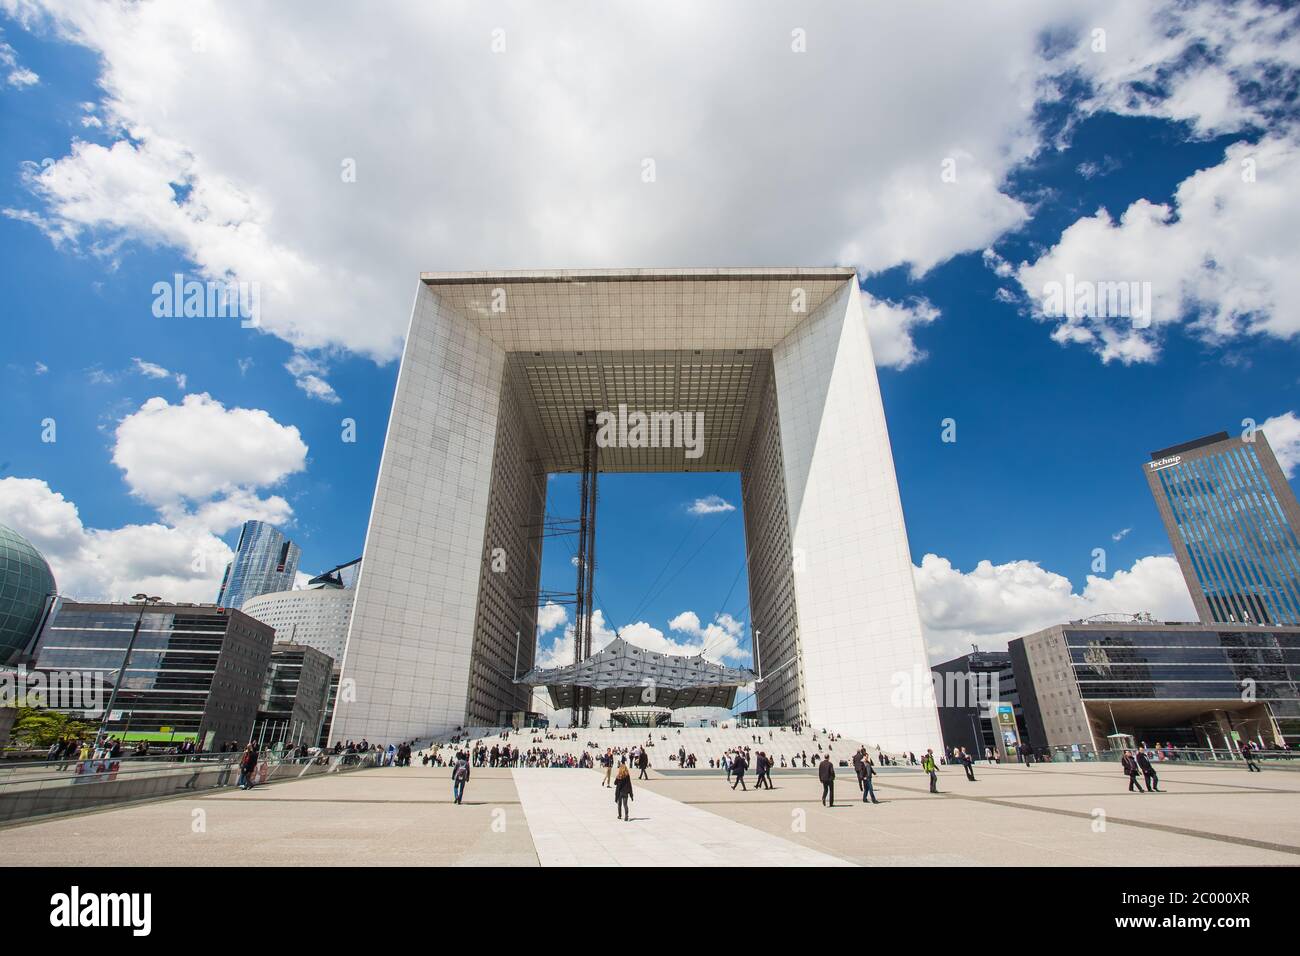 PARIS - MAY 15: Tourists walking in the central square of La Defense a major business district of Paris, on May 15 2014 in Paris Stock Photo